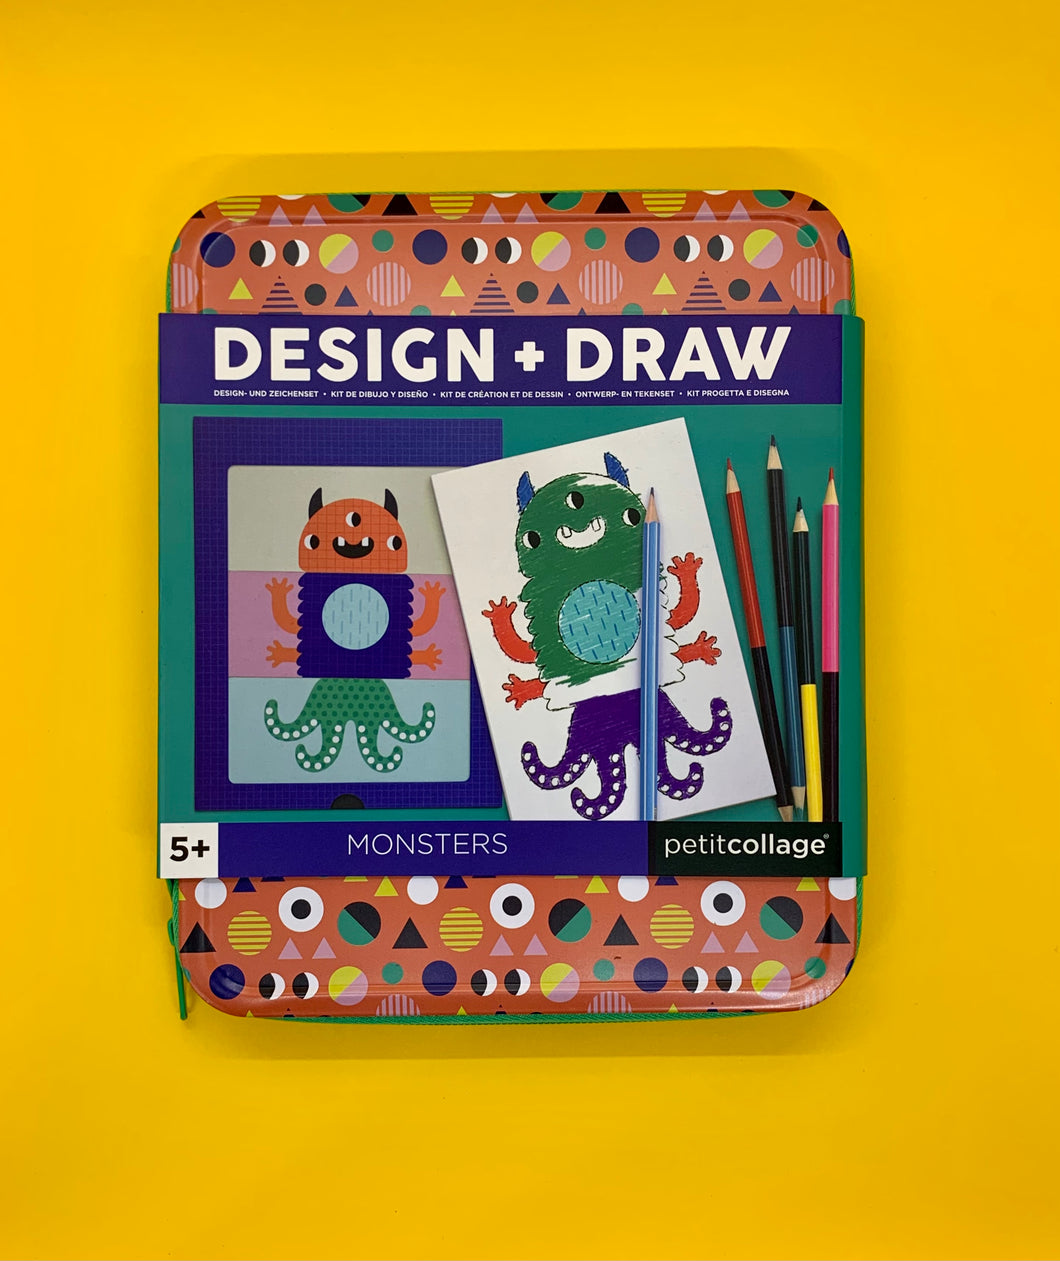 The Harley Gallery Shop Online // Design and Draw Monsters Kit by petitcollage